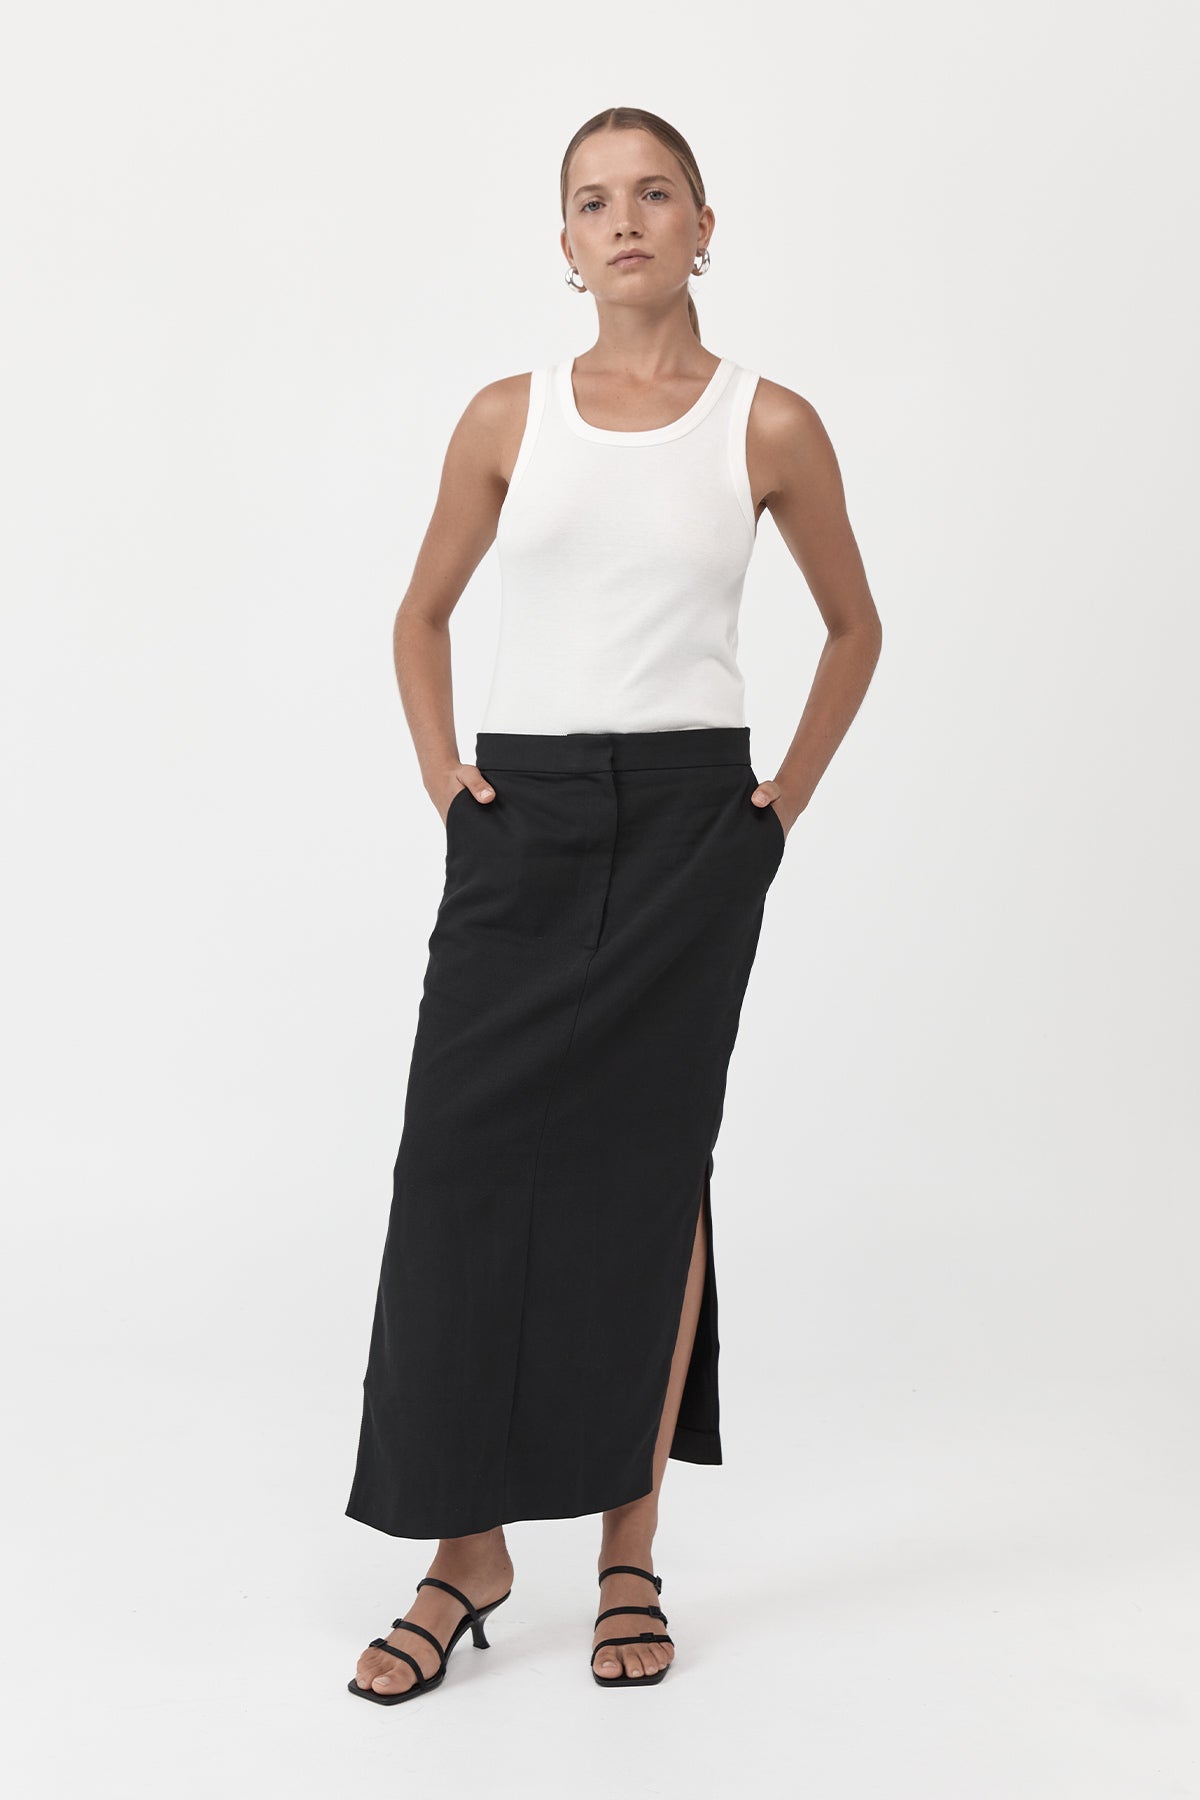 St. Agni | Low waisted Tailored Skirt - Black